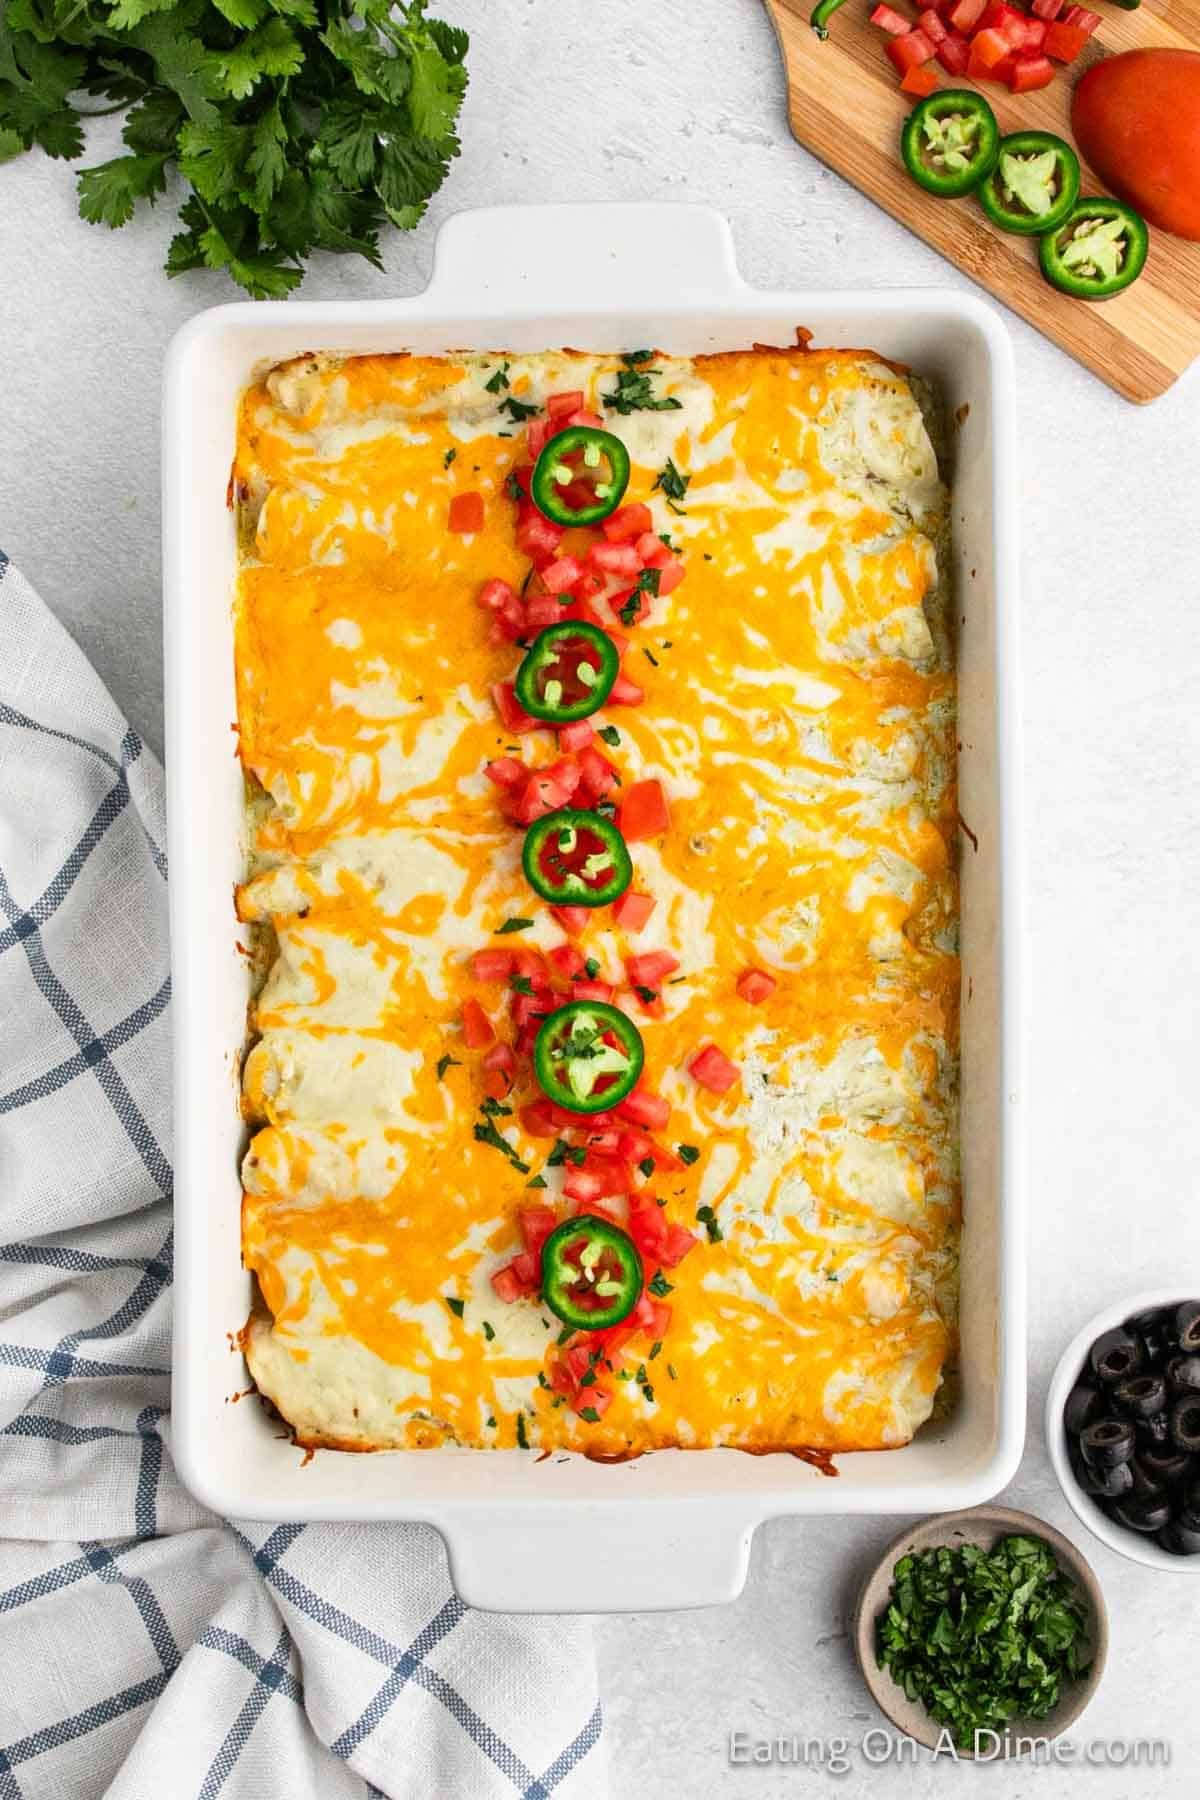 Green chili enchiladas in a baking dish topped with diced tomatoes and slice jalapenos